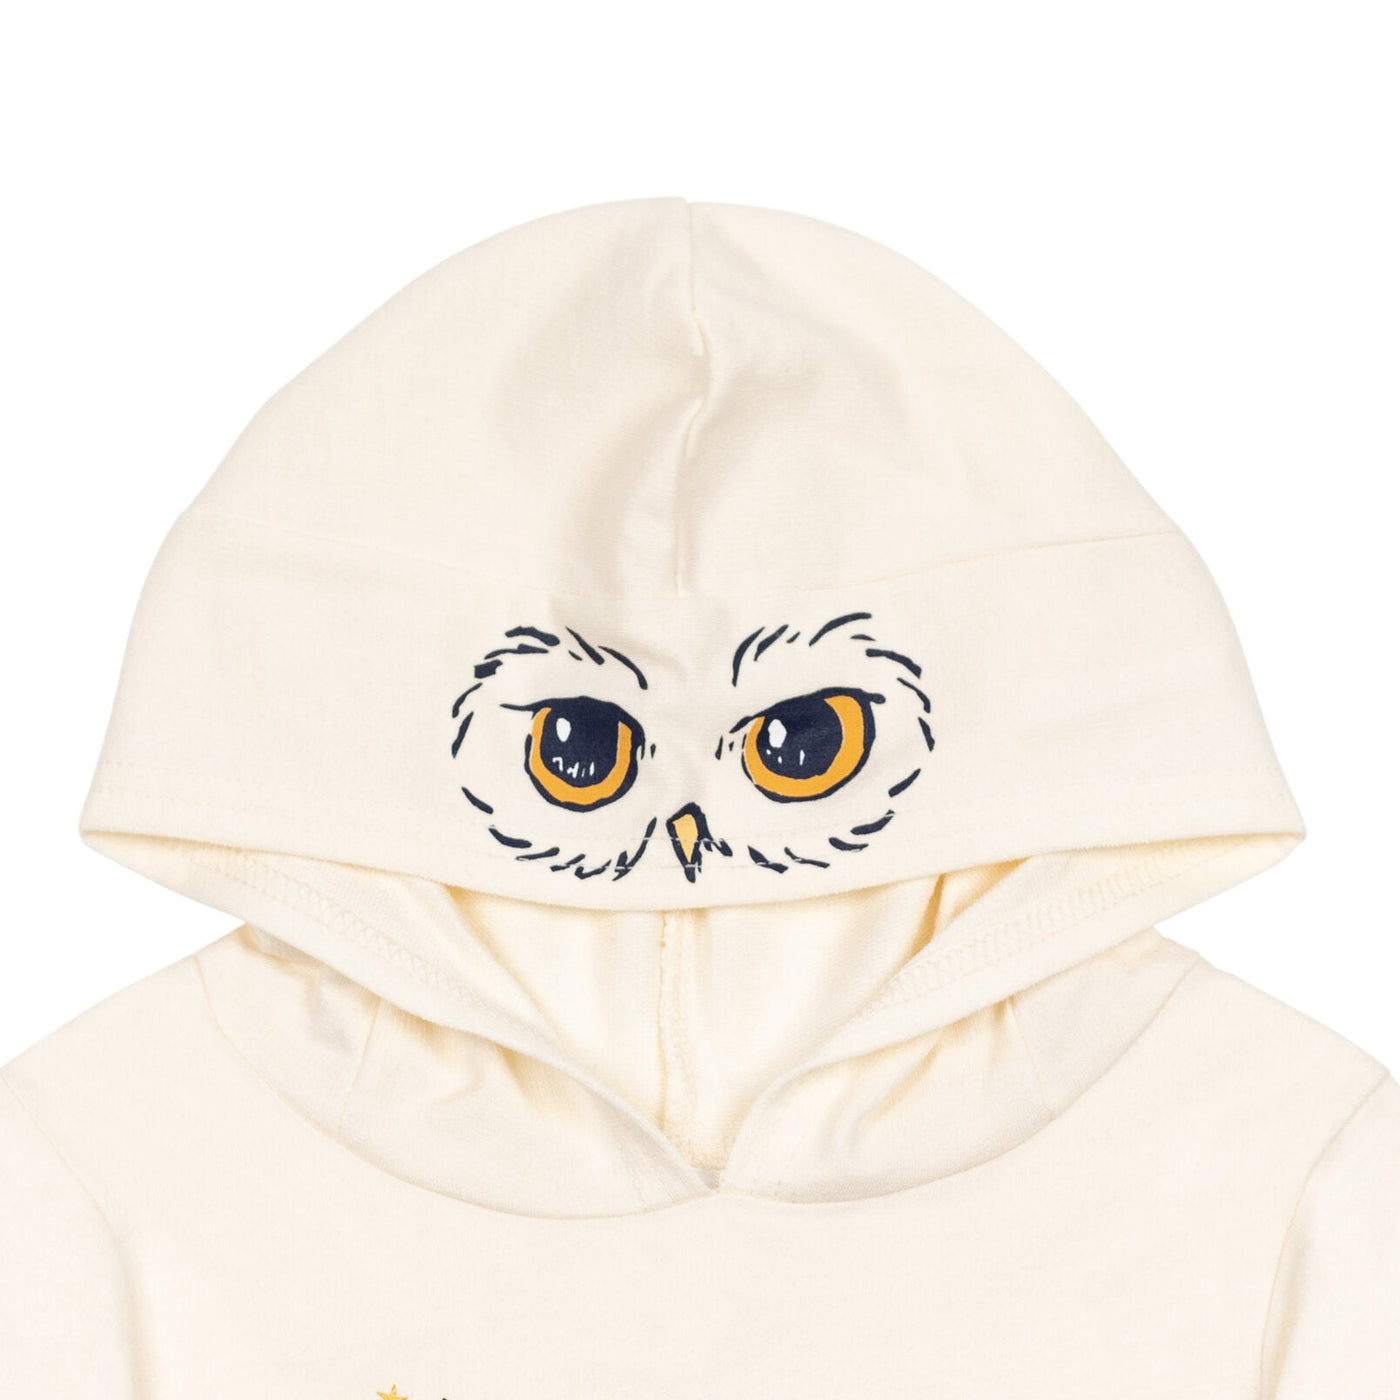 Harry Potter Hedwig French Terry Pullover Hoodie - imagikids